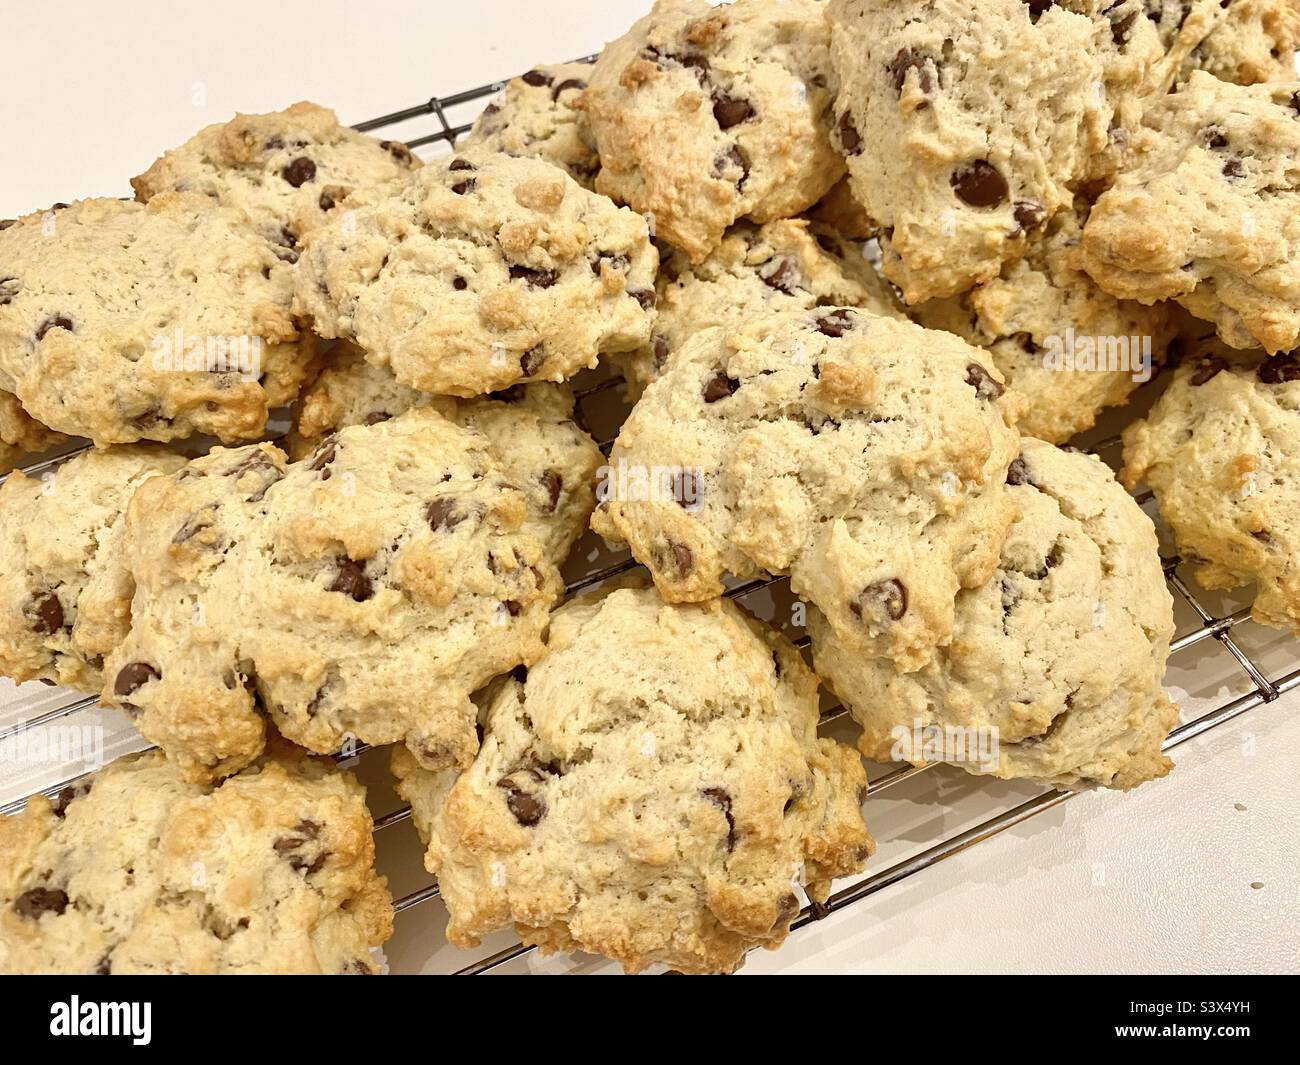 Freshly baked chocolate rock cakes on a cooling rack Stock Photo